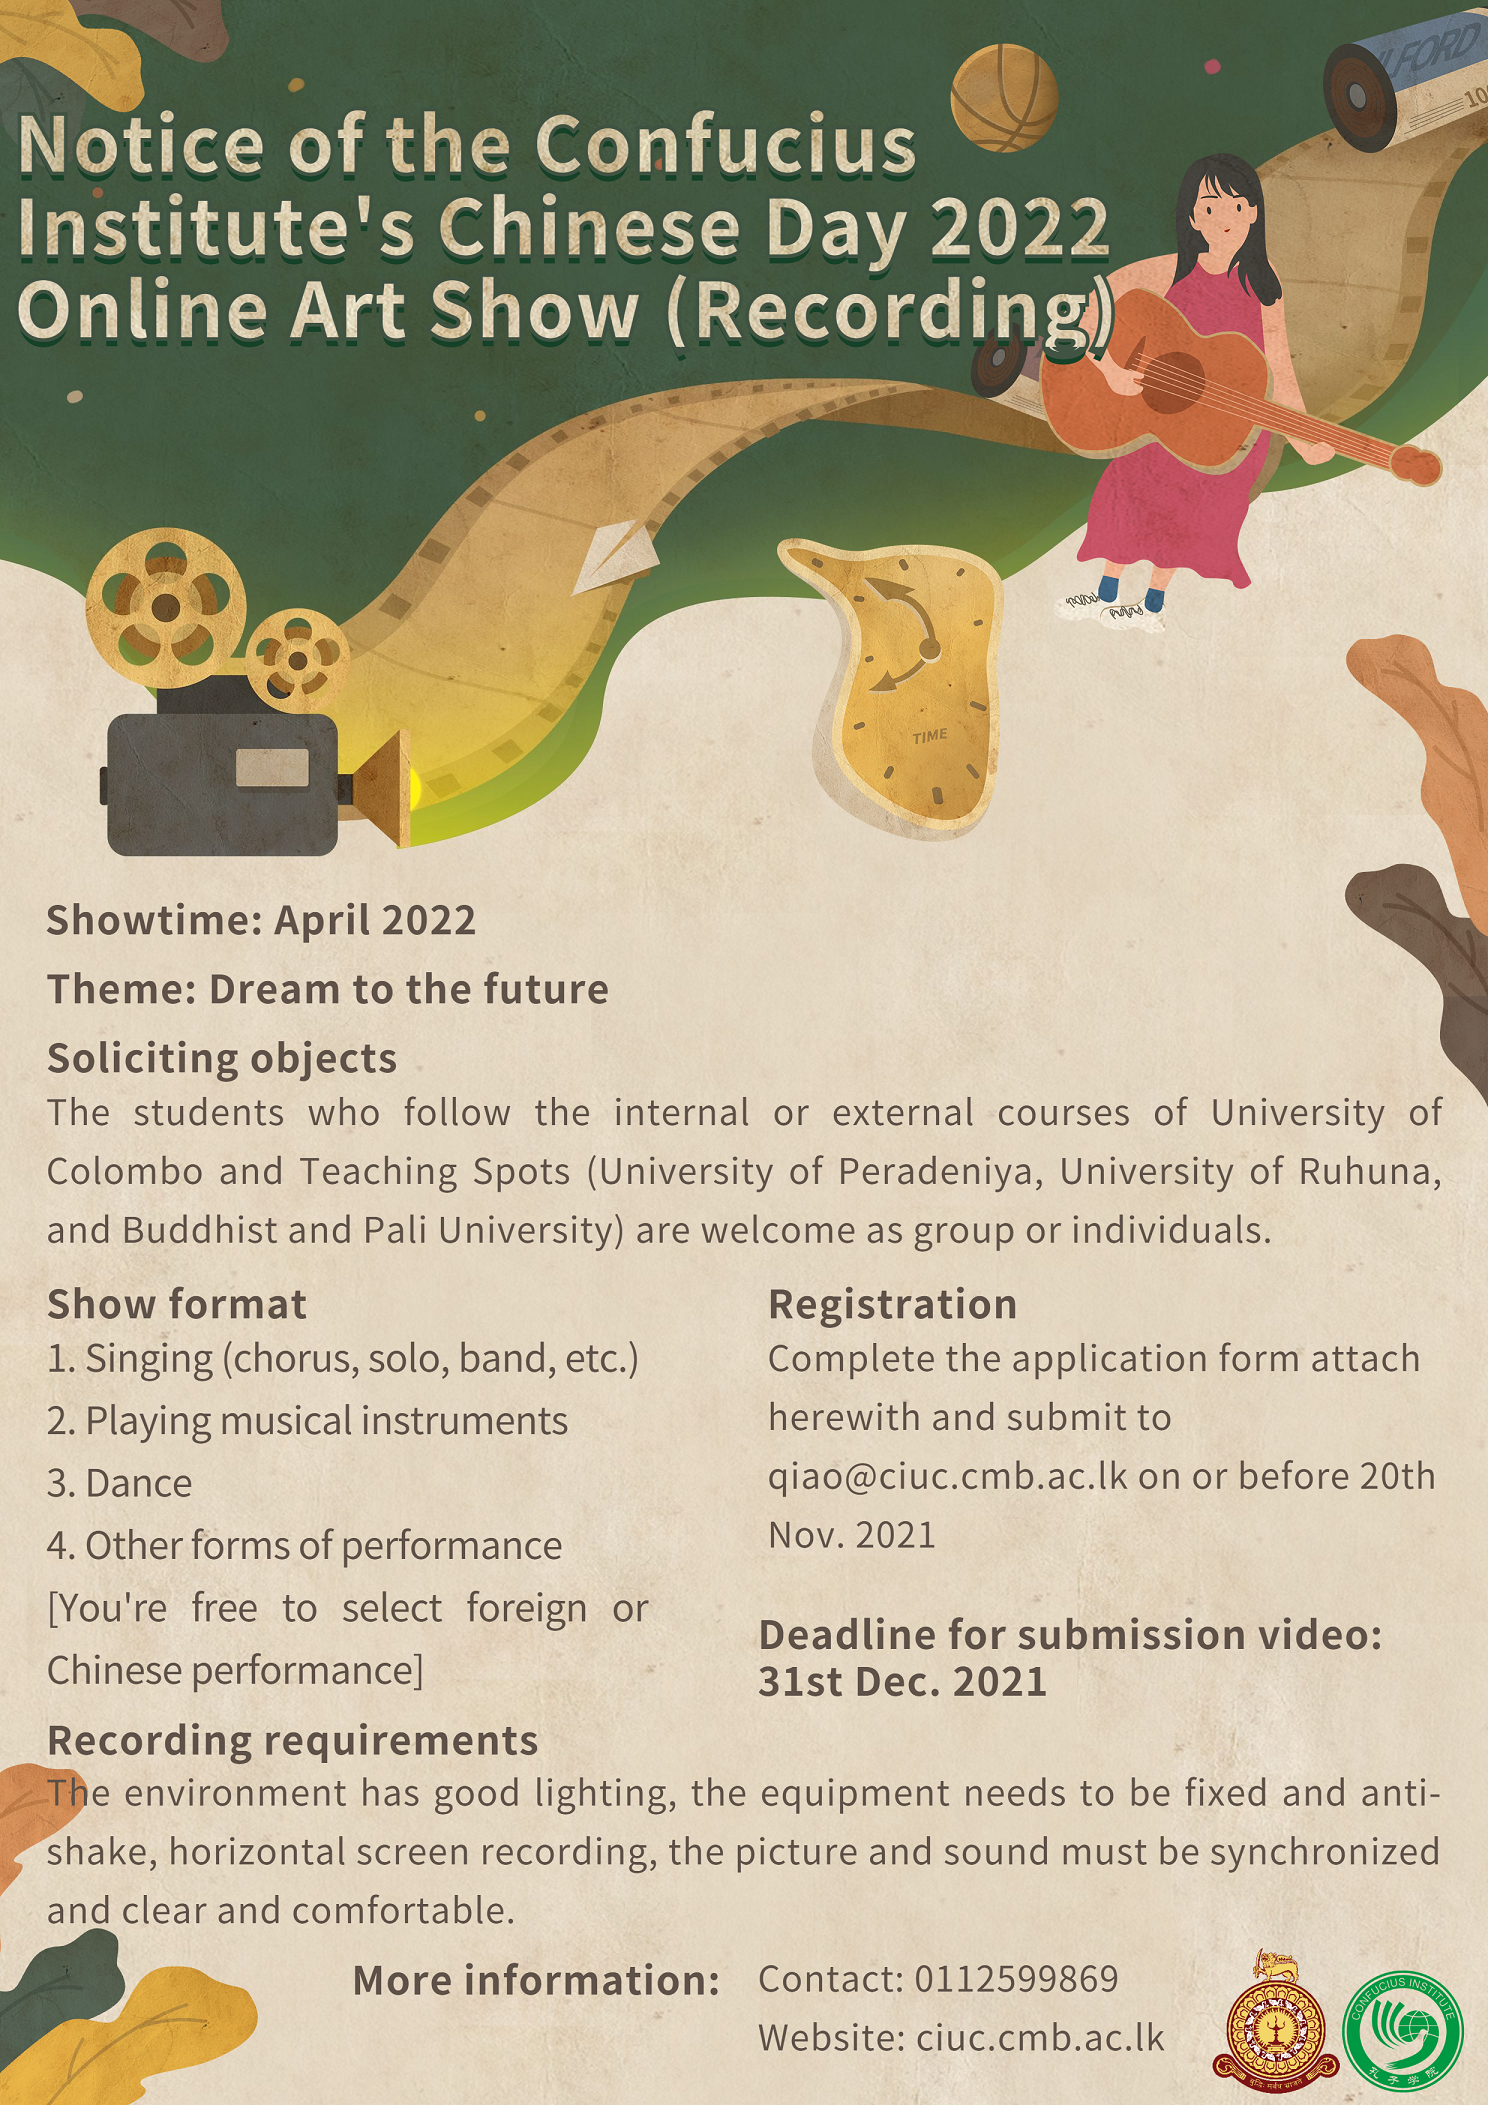 Notice of the Confucius Institute’s Chinese Day 2022 Online Art Show Recording